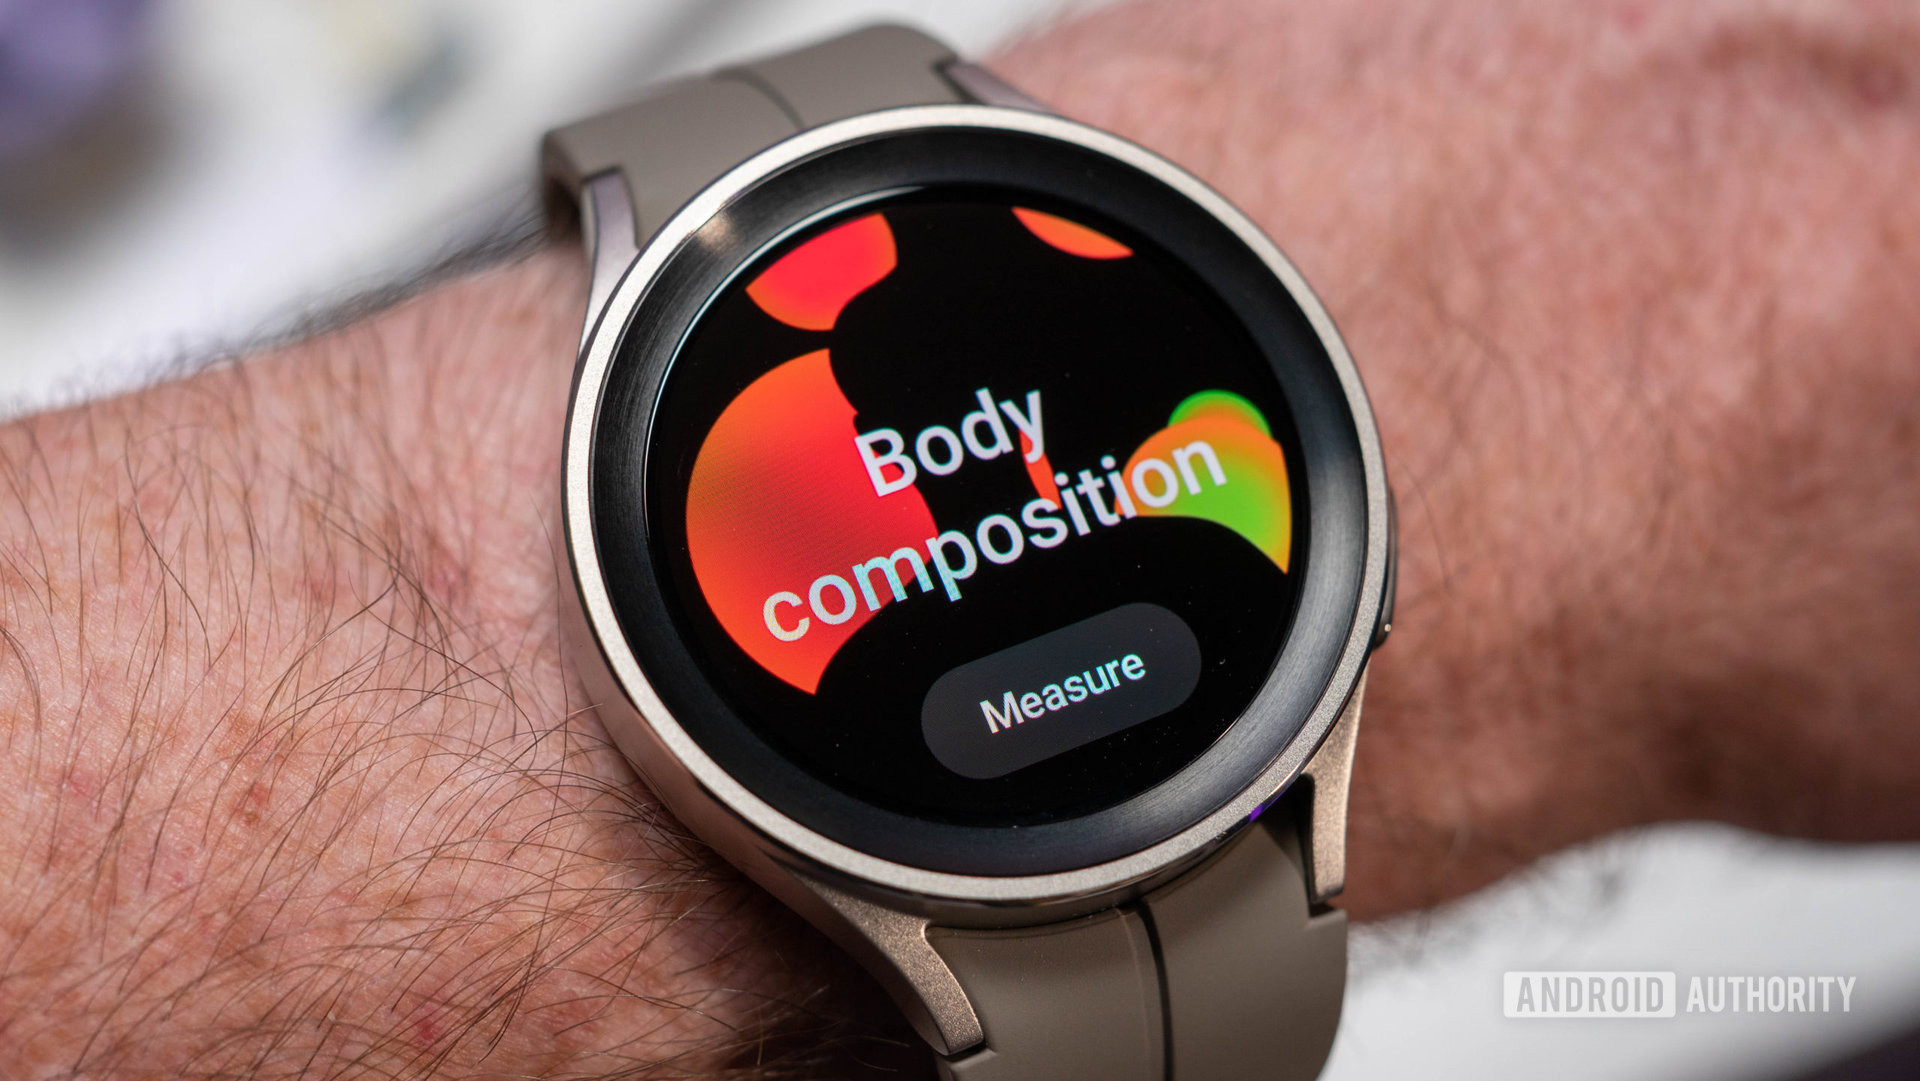 Samsung Galaxy Watch 5 Pro in silver color with fluoroelastomer strap on wrist showing body composition screen